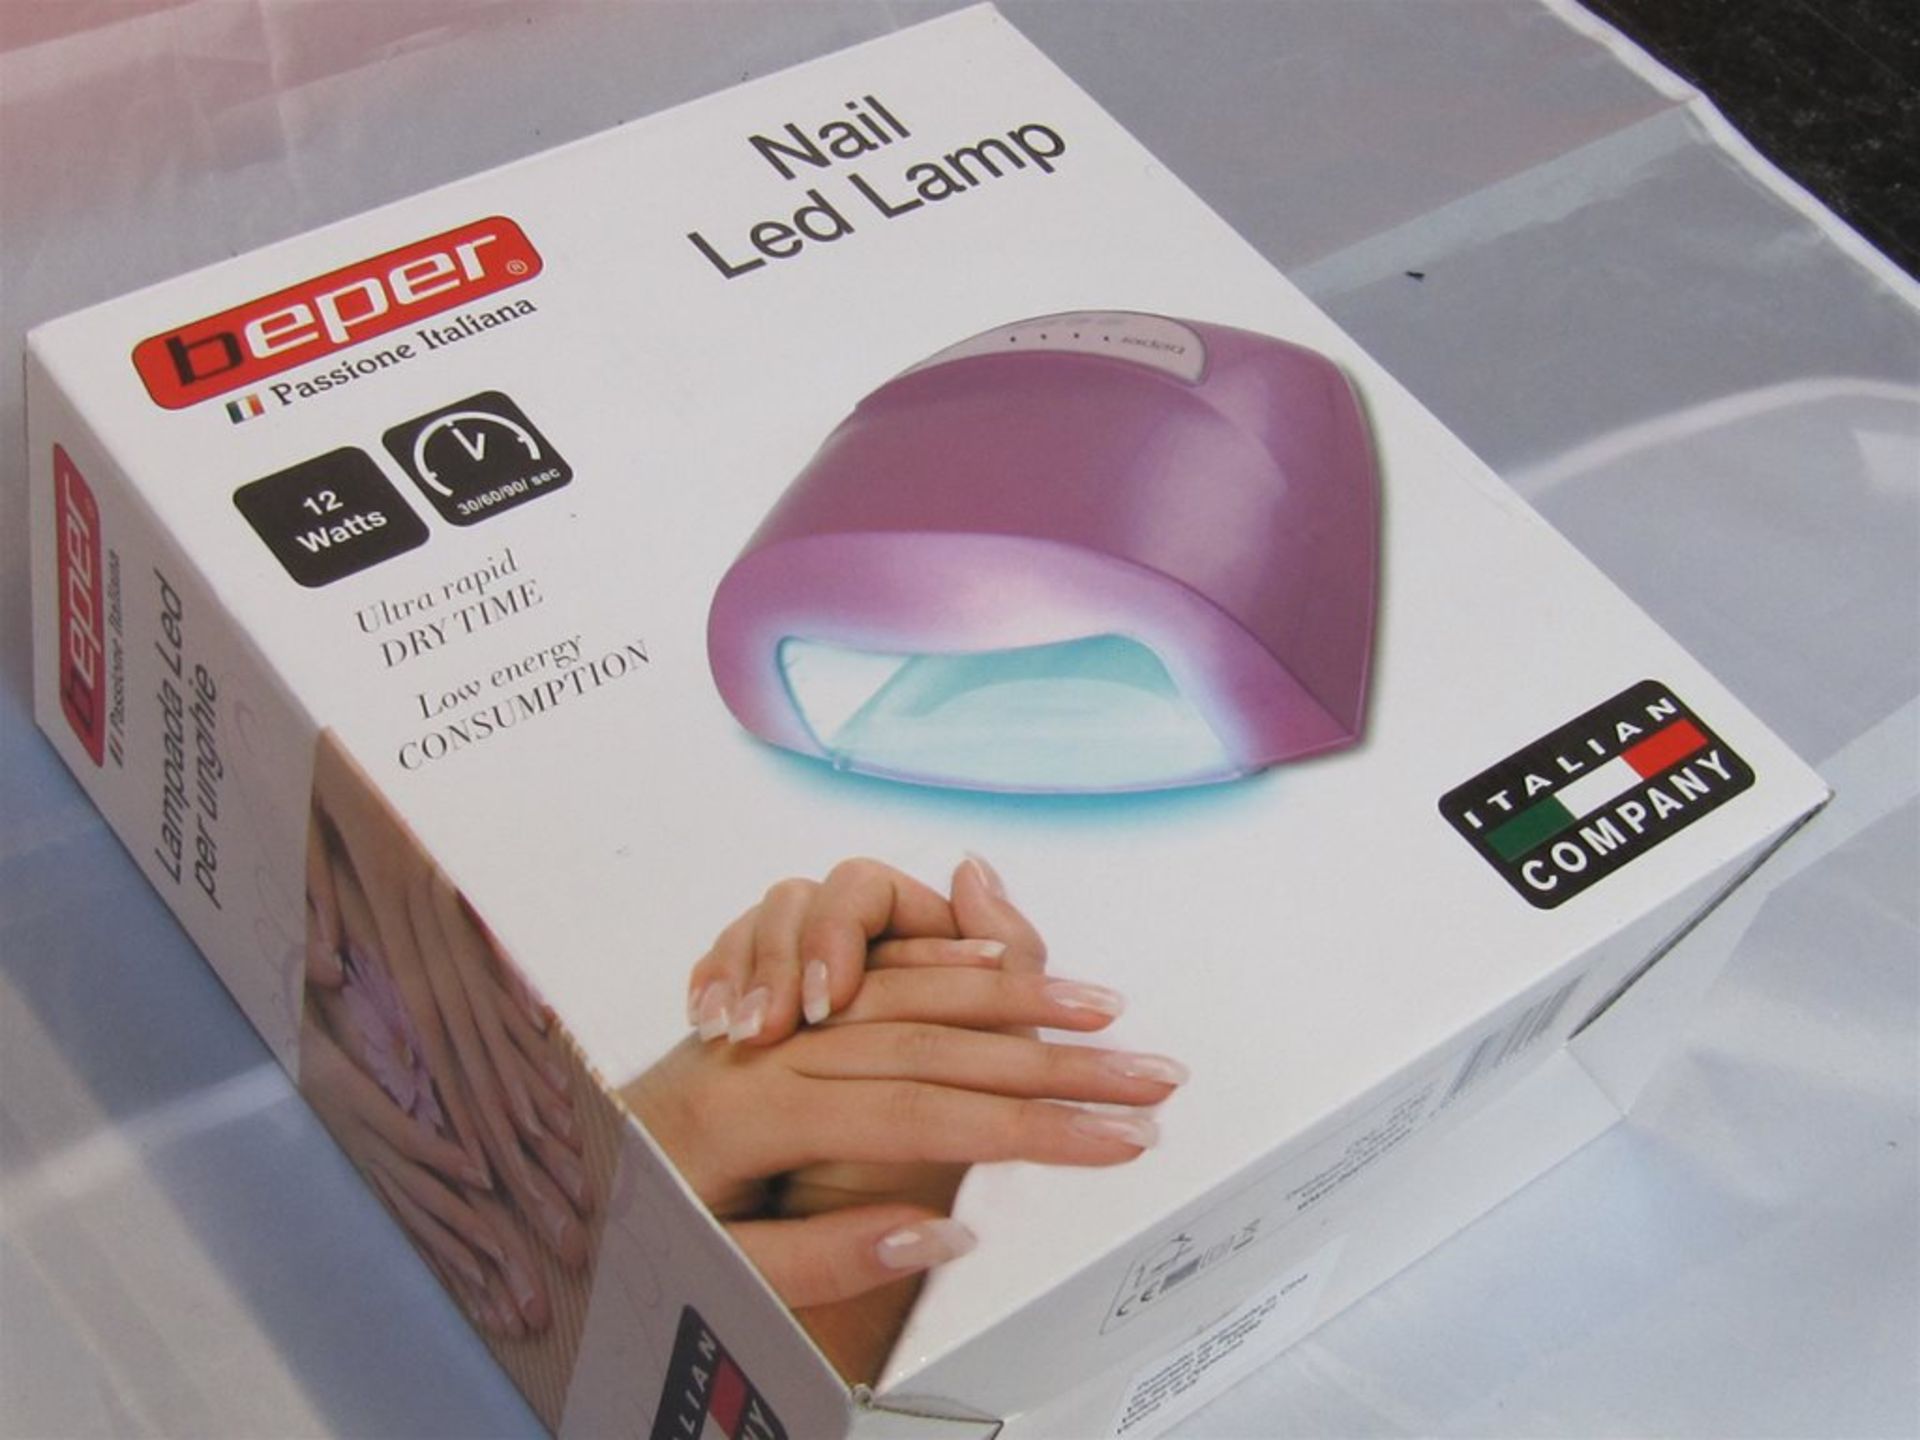 73) Beper LED Nail Lamp. 12w Rapid Dry Time. No vat on Hammer.